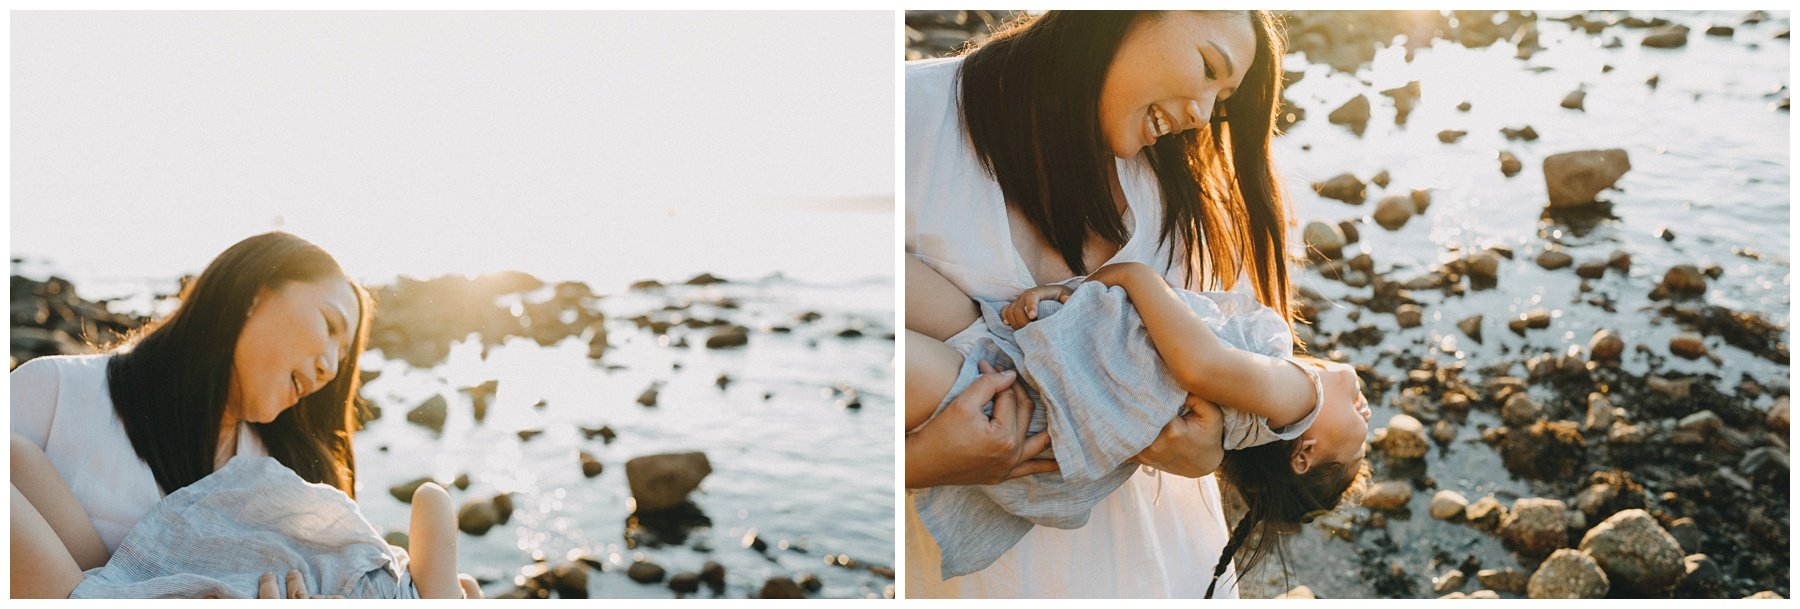 Vancouver Family Photographer || Stanley Park Family photographer || Jayme Lang Photographer_4216.jpg